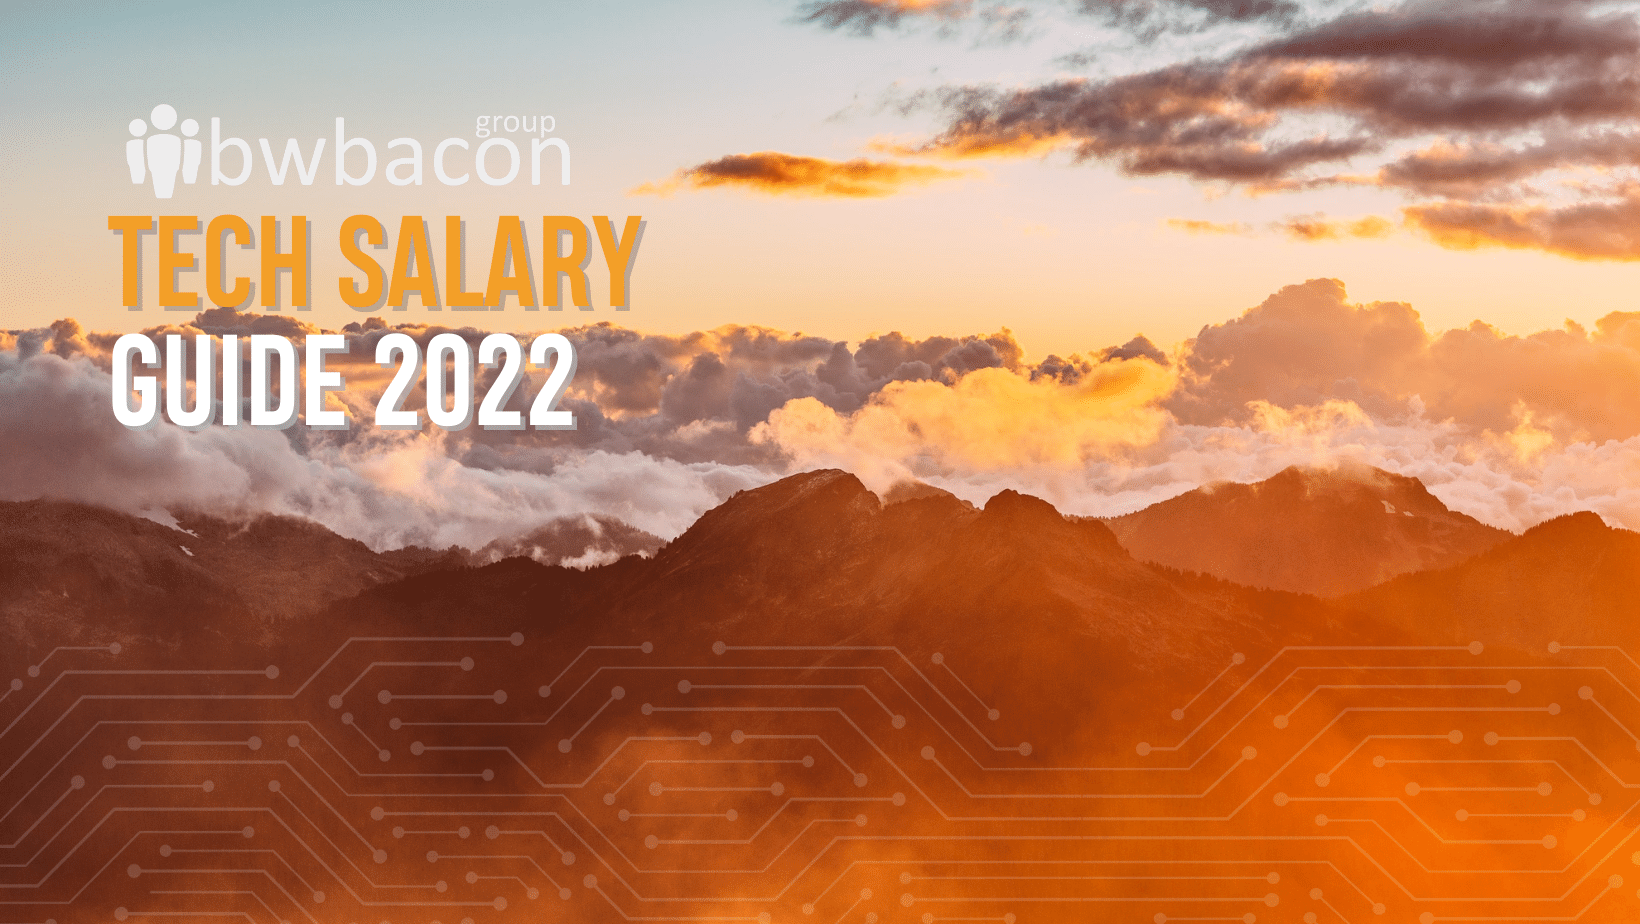 BWBacon Tech Salary Guide 2022 Footer